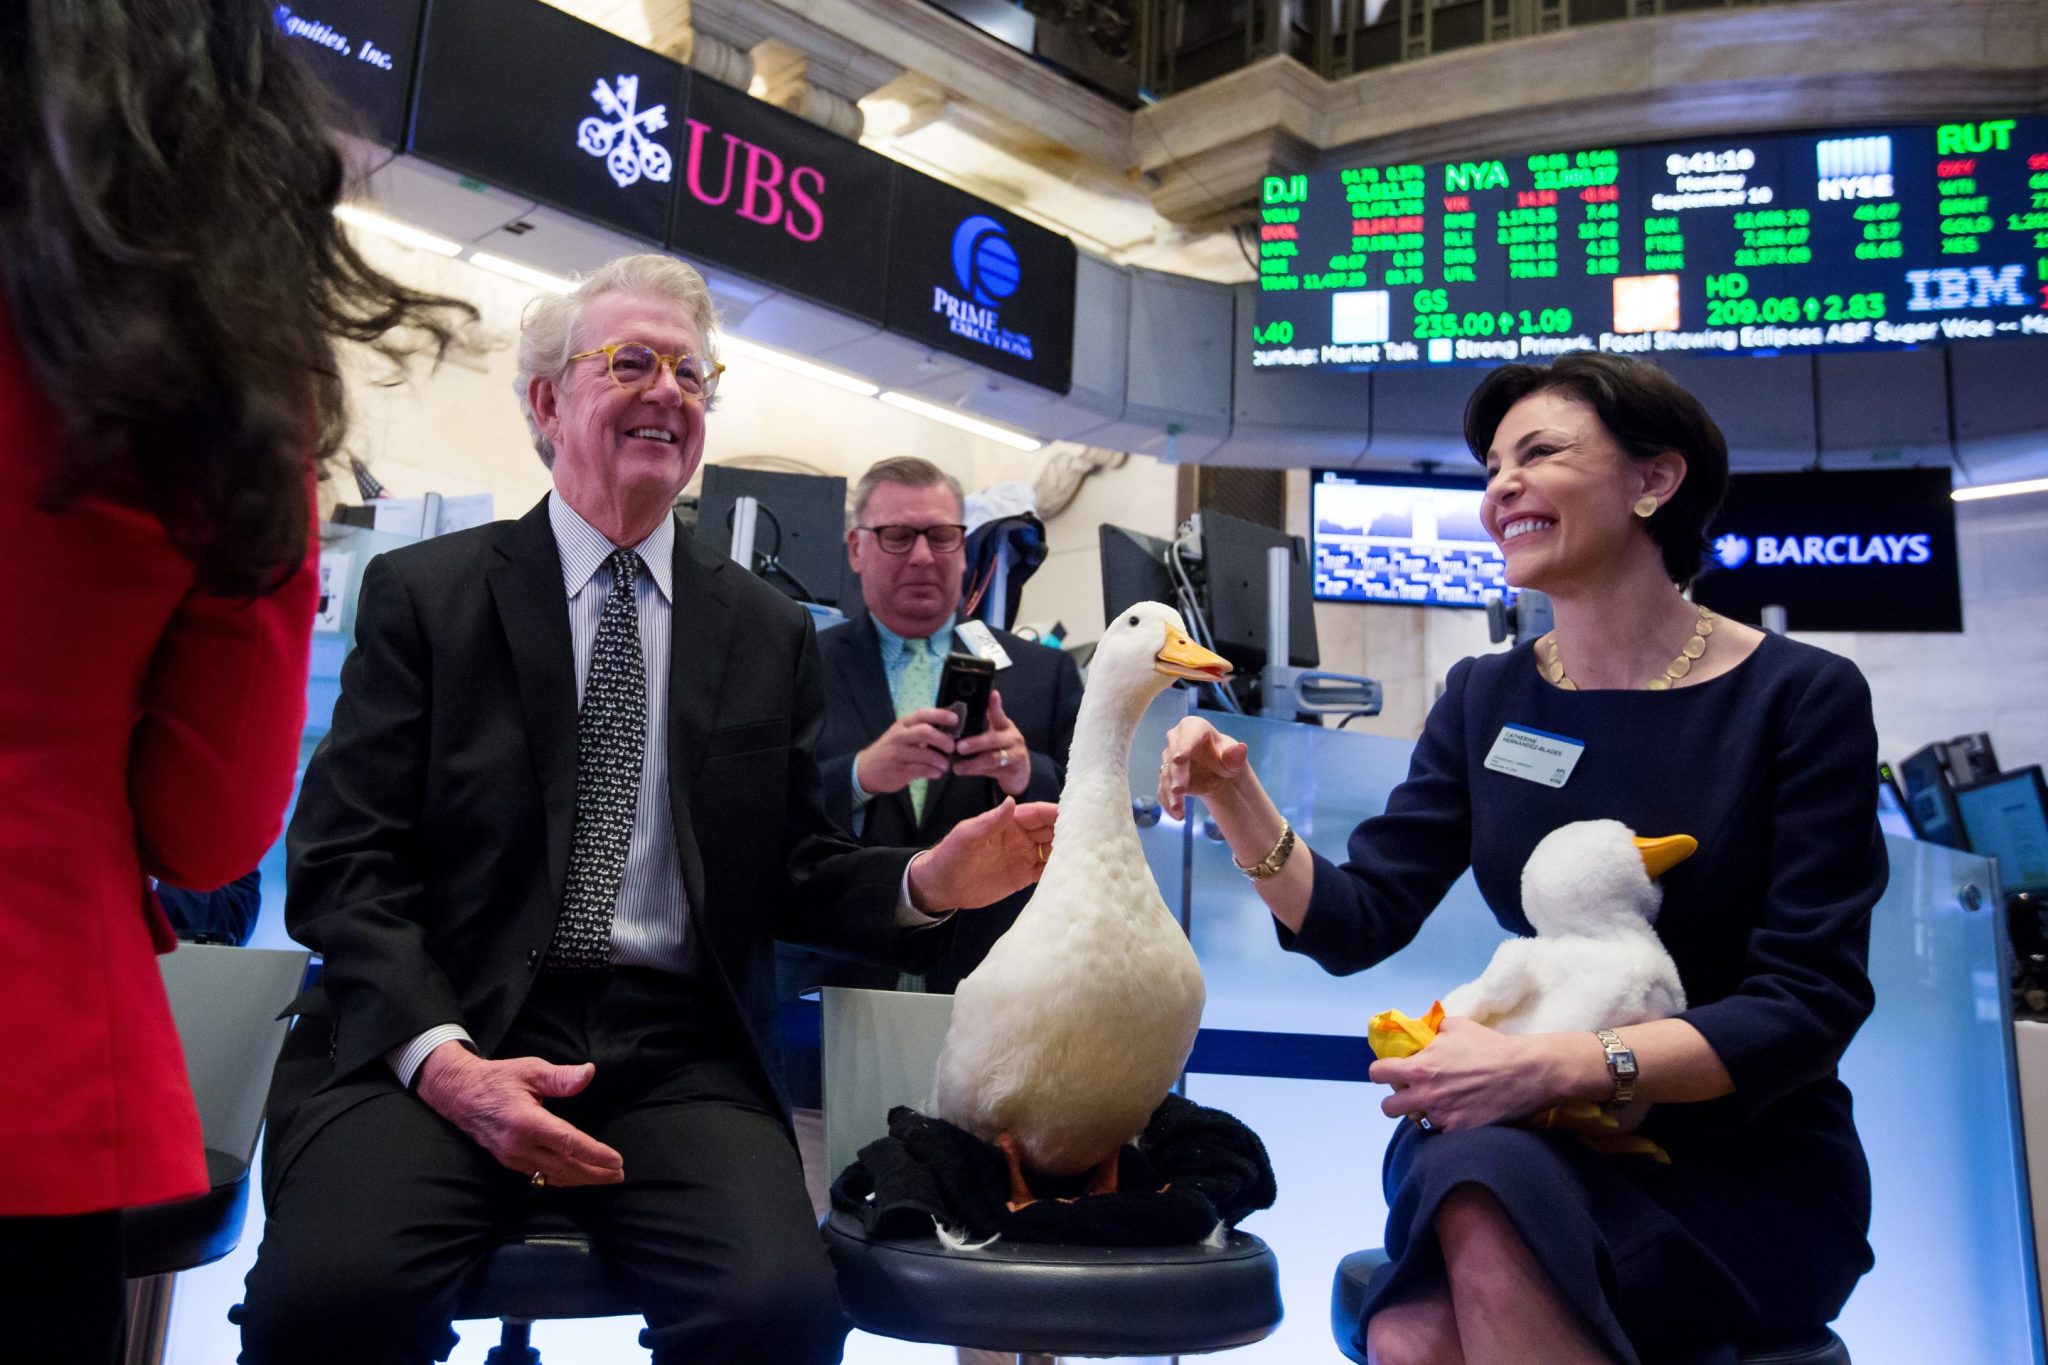 The Aflac duck success story: How the company achieved wild success from a simple park bench meeting